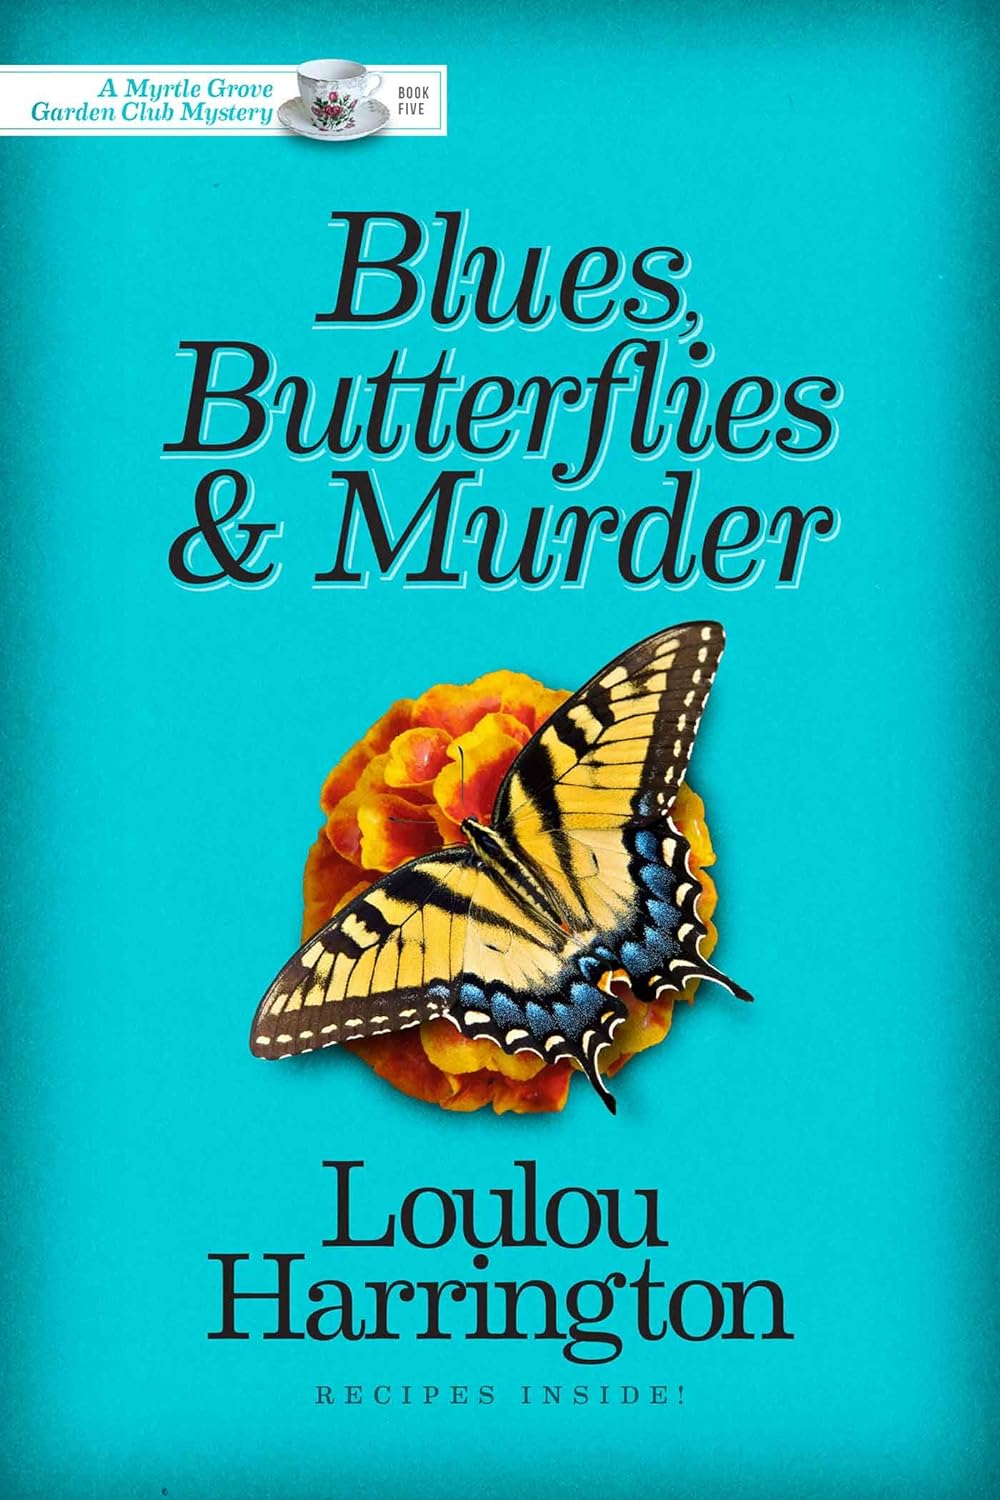 Mystery Book by Bestselling Author Loulou Harrington